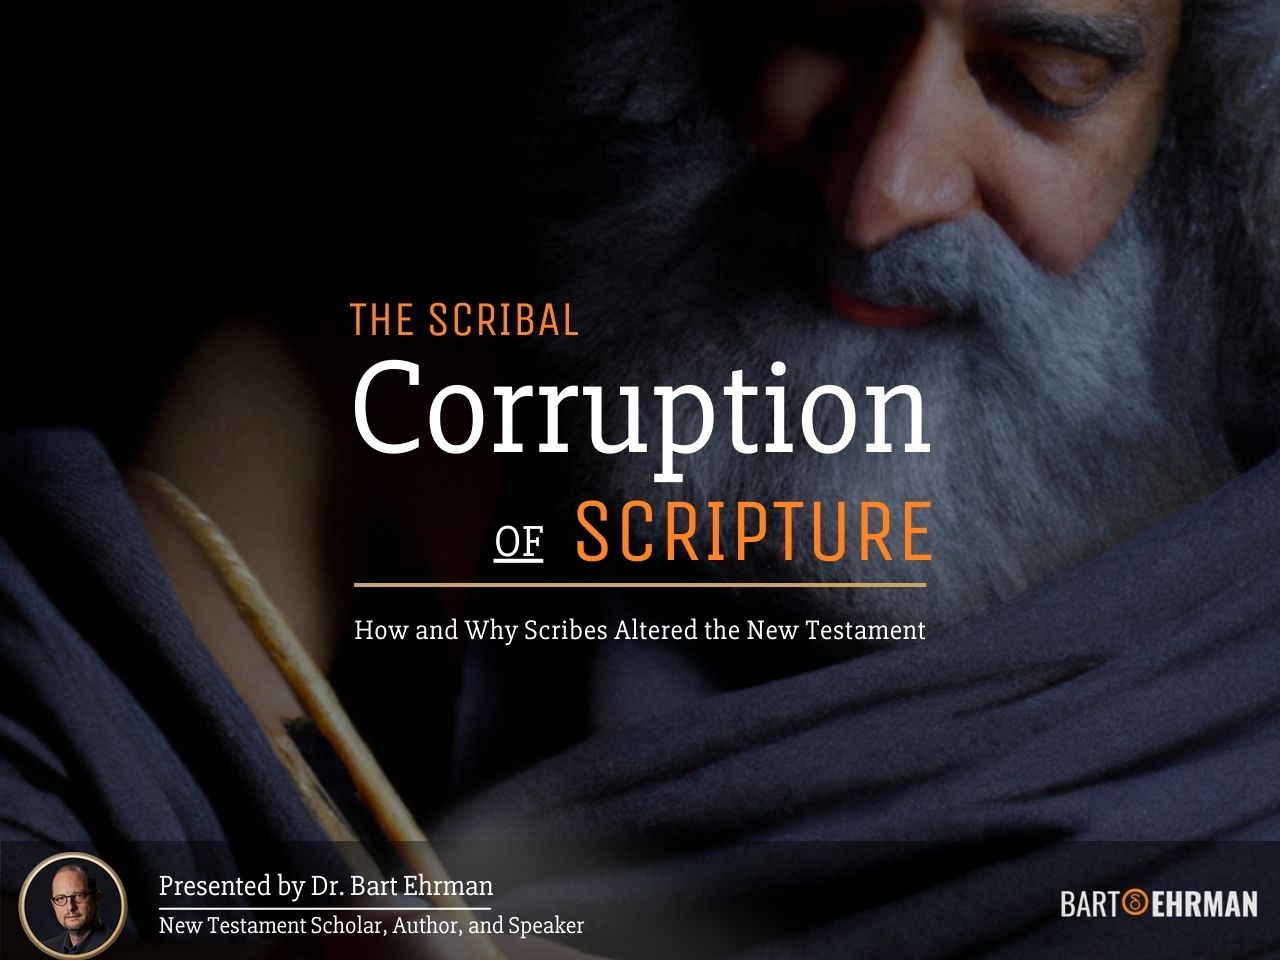 The Scribal Corruption of Scripture Course By Bart Ehrman